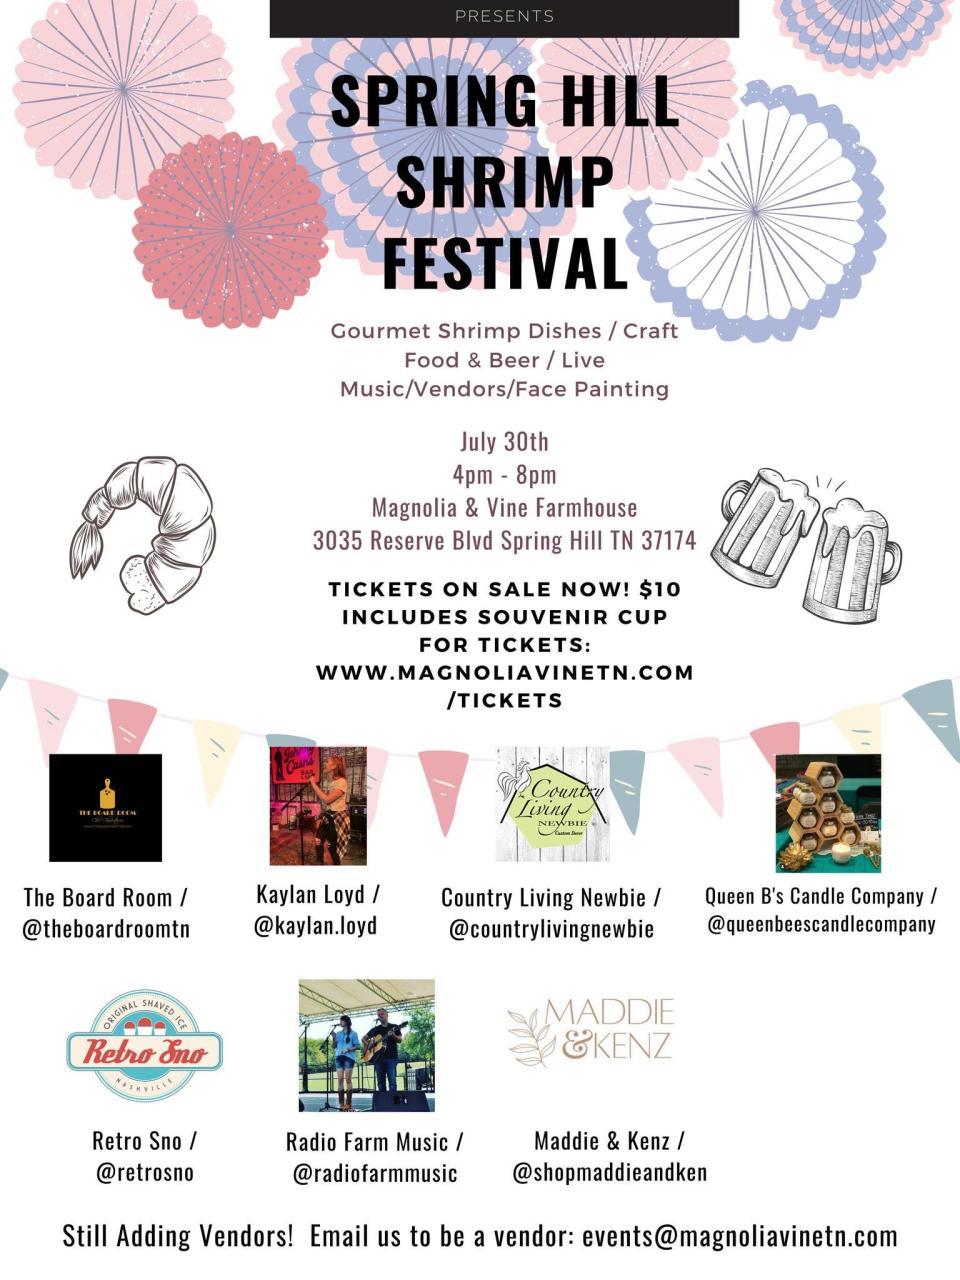 The first Spring Hill Shrimp Festival will take place Saturday, featuring gourmet shrimp dishes, face painting, live music and more.